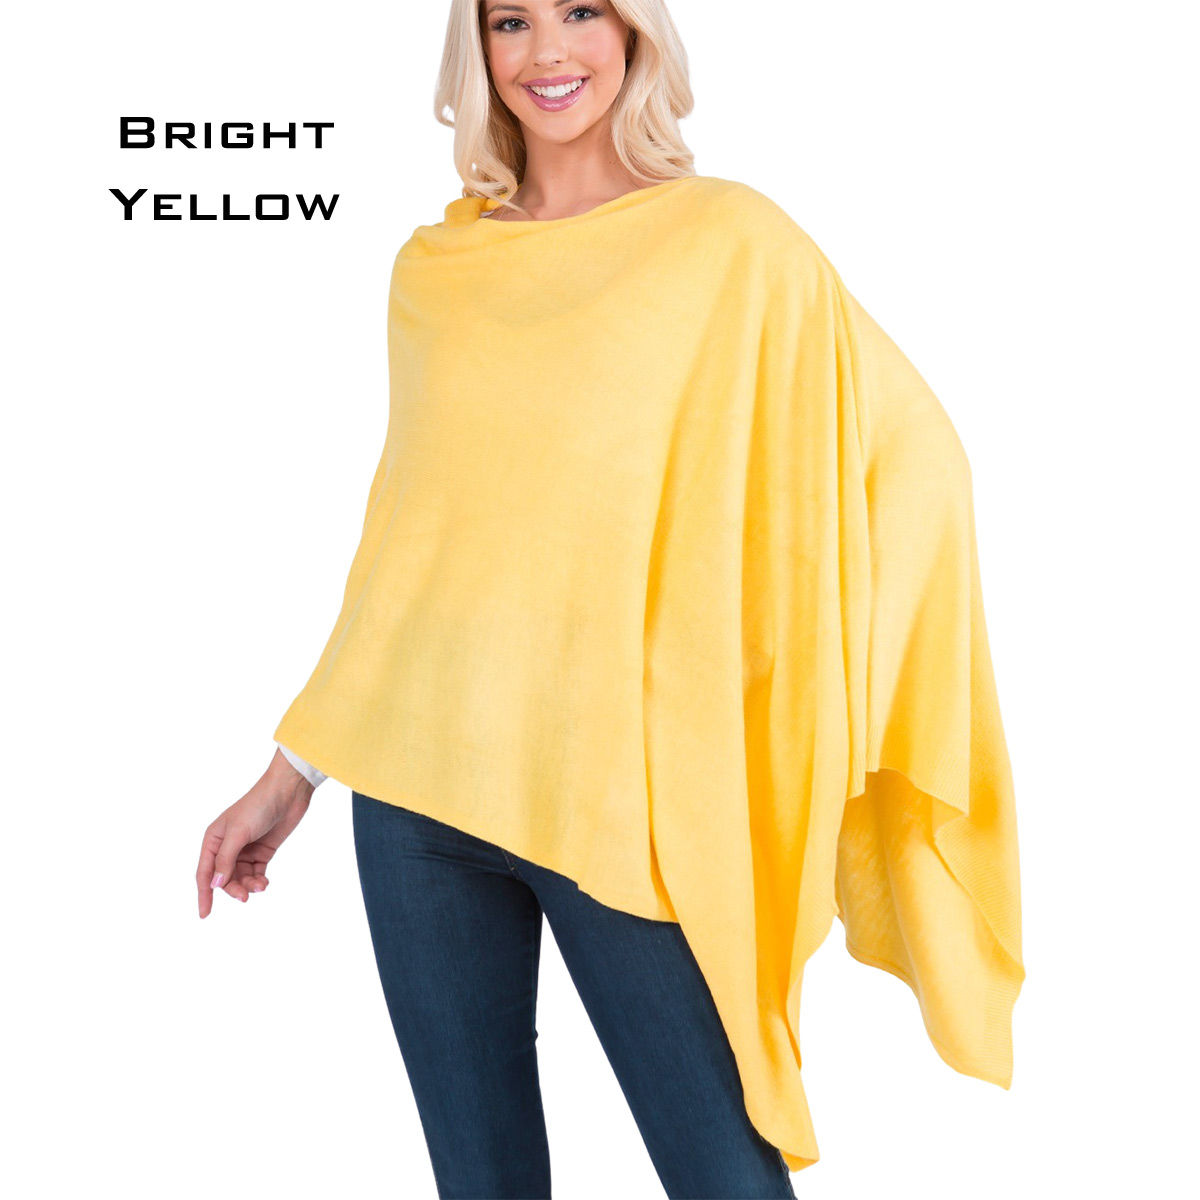 8672 - Cashmere Feel Ponchos  Orange  - One Size Fits Most